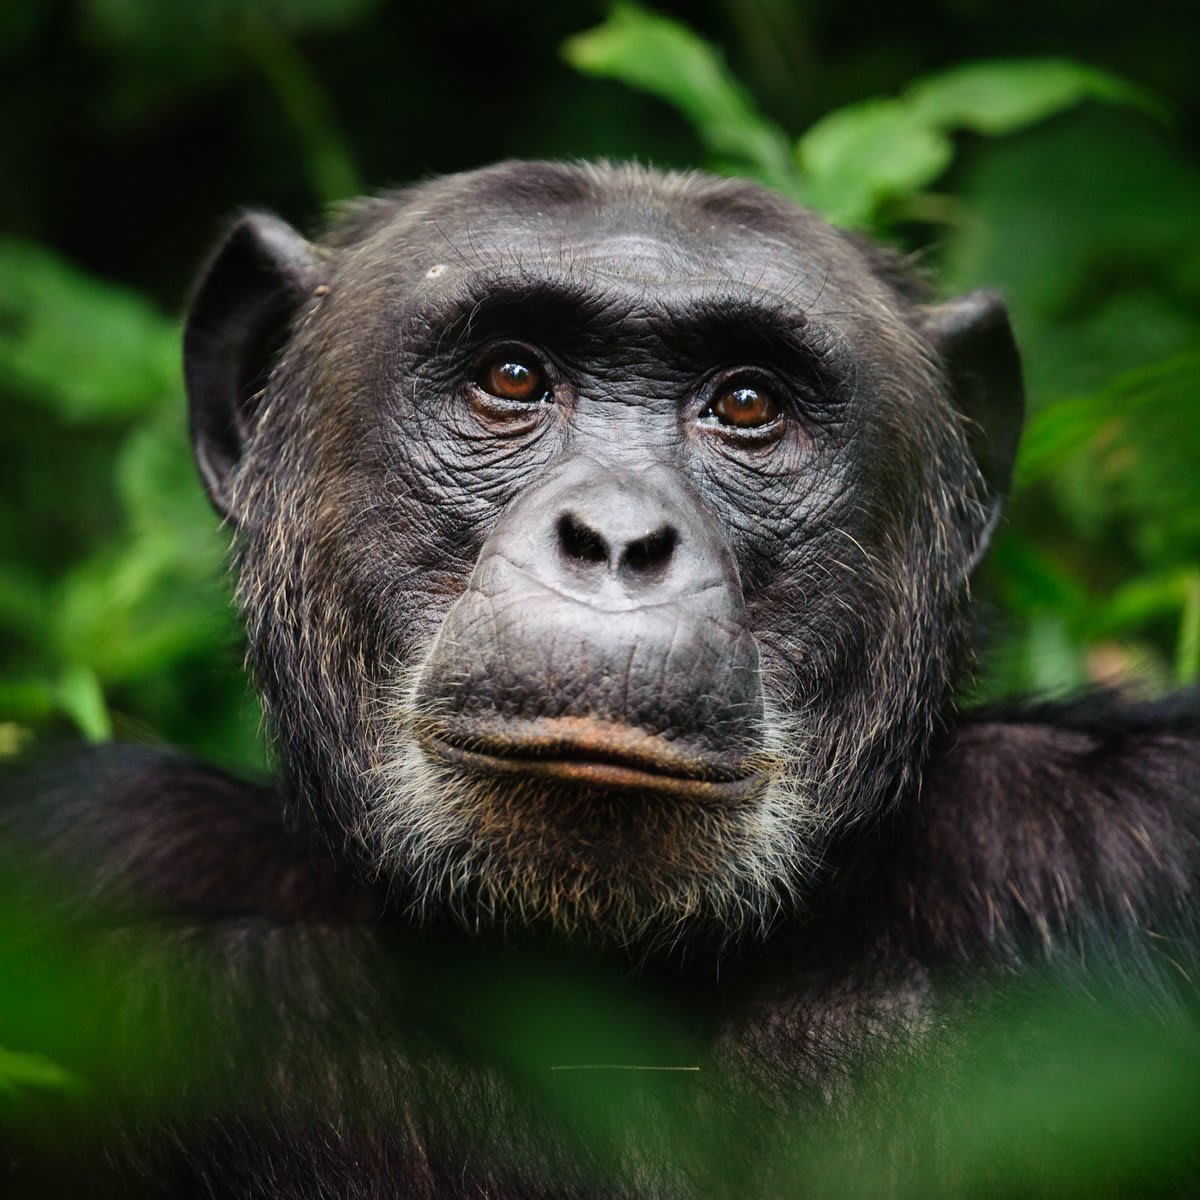 Image by Marc Guitard The tranquil chimpanzee gaze.